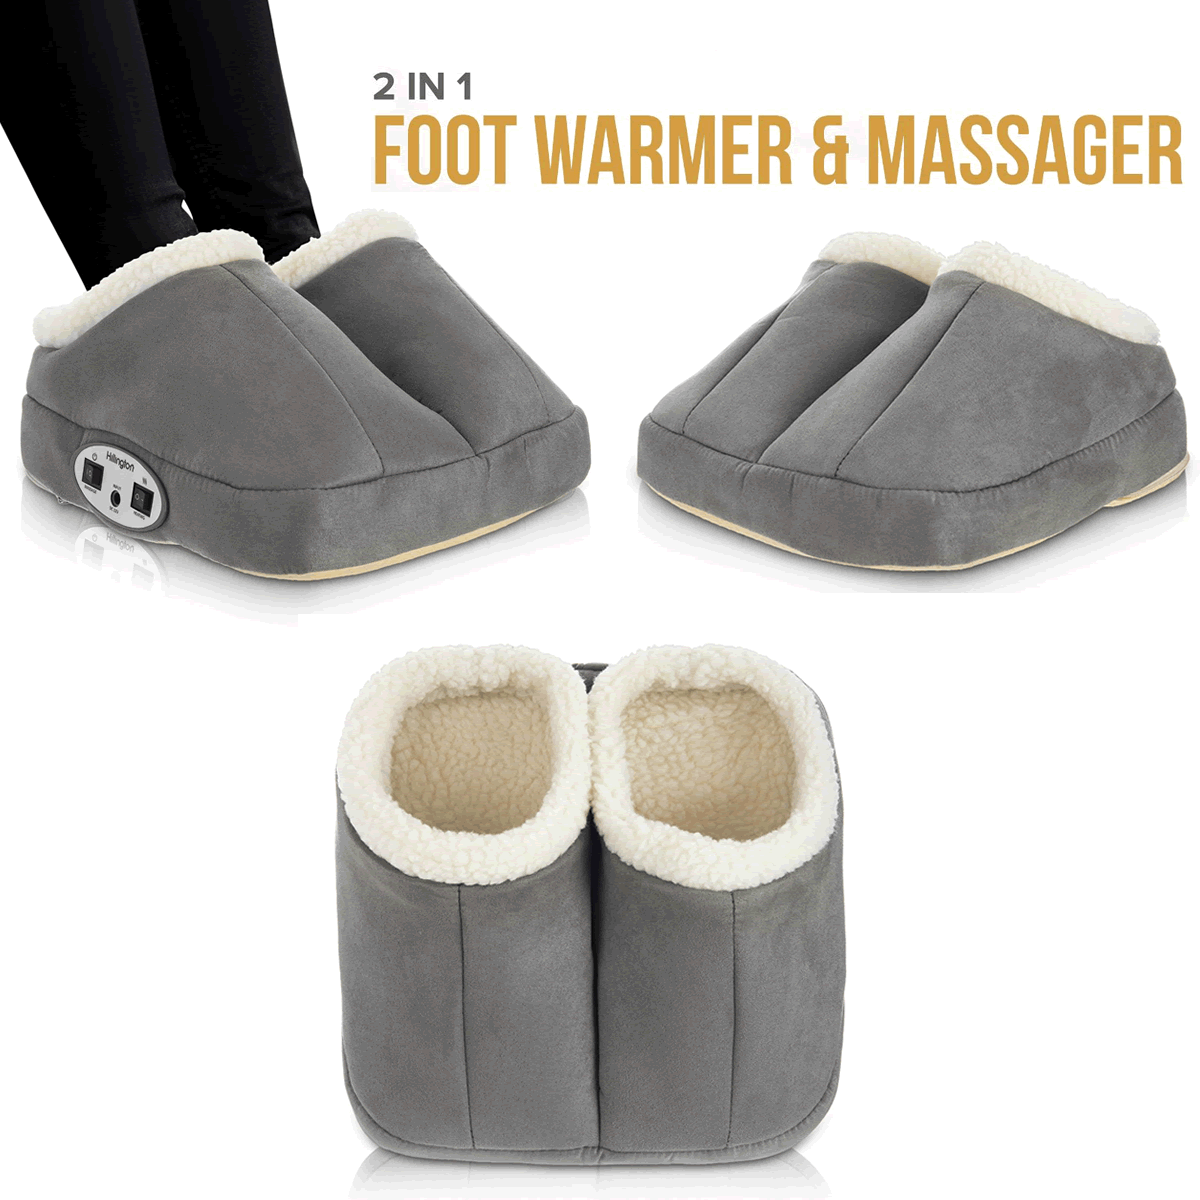 foot warmer and massager